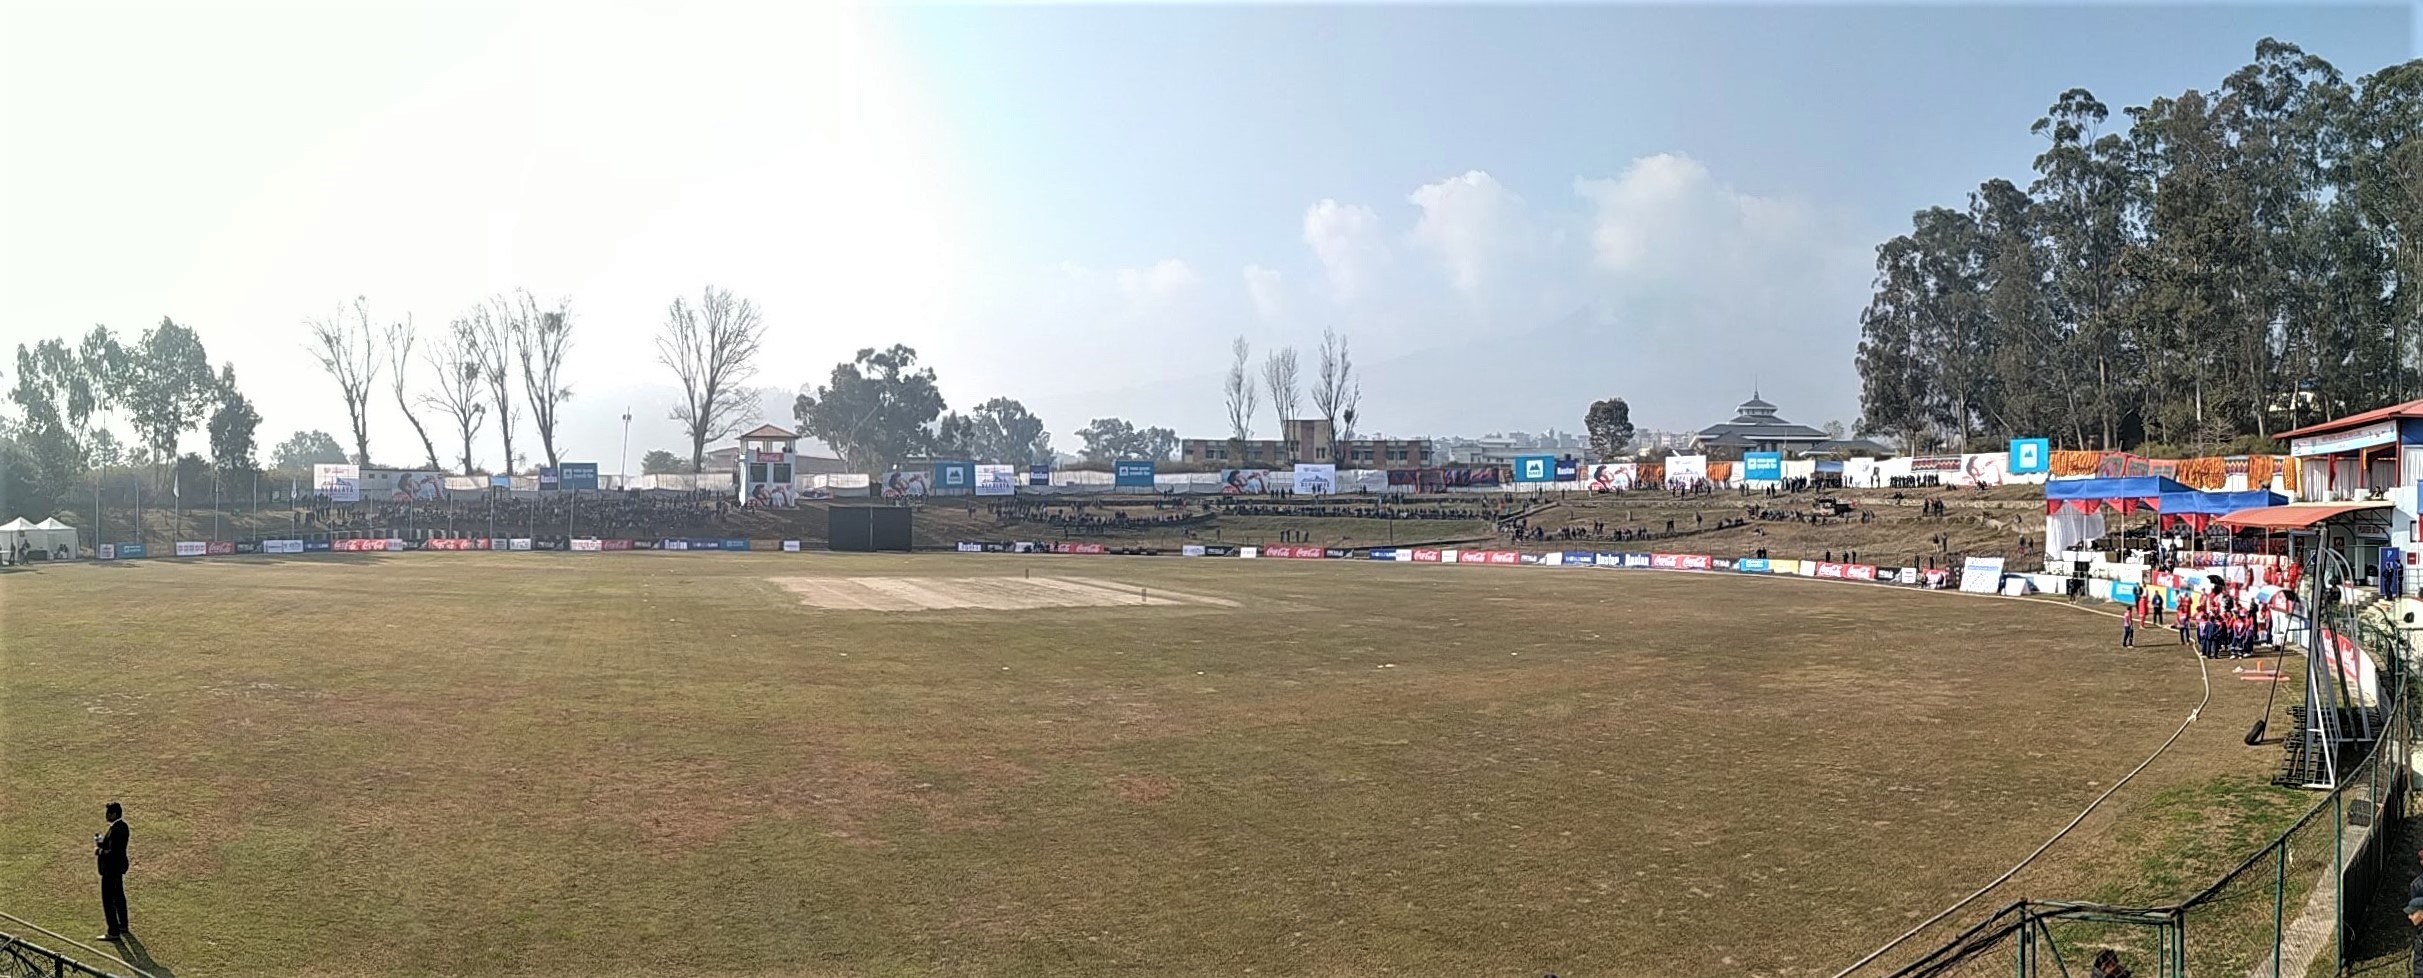 Team USA’s CWC League 2 matches in Nepal to be broadcast live on Willow TV